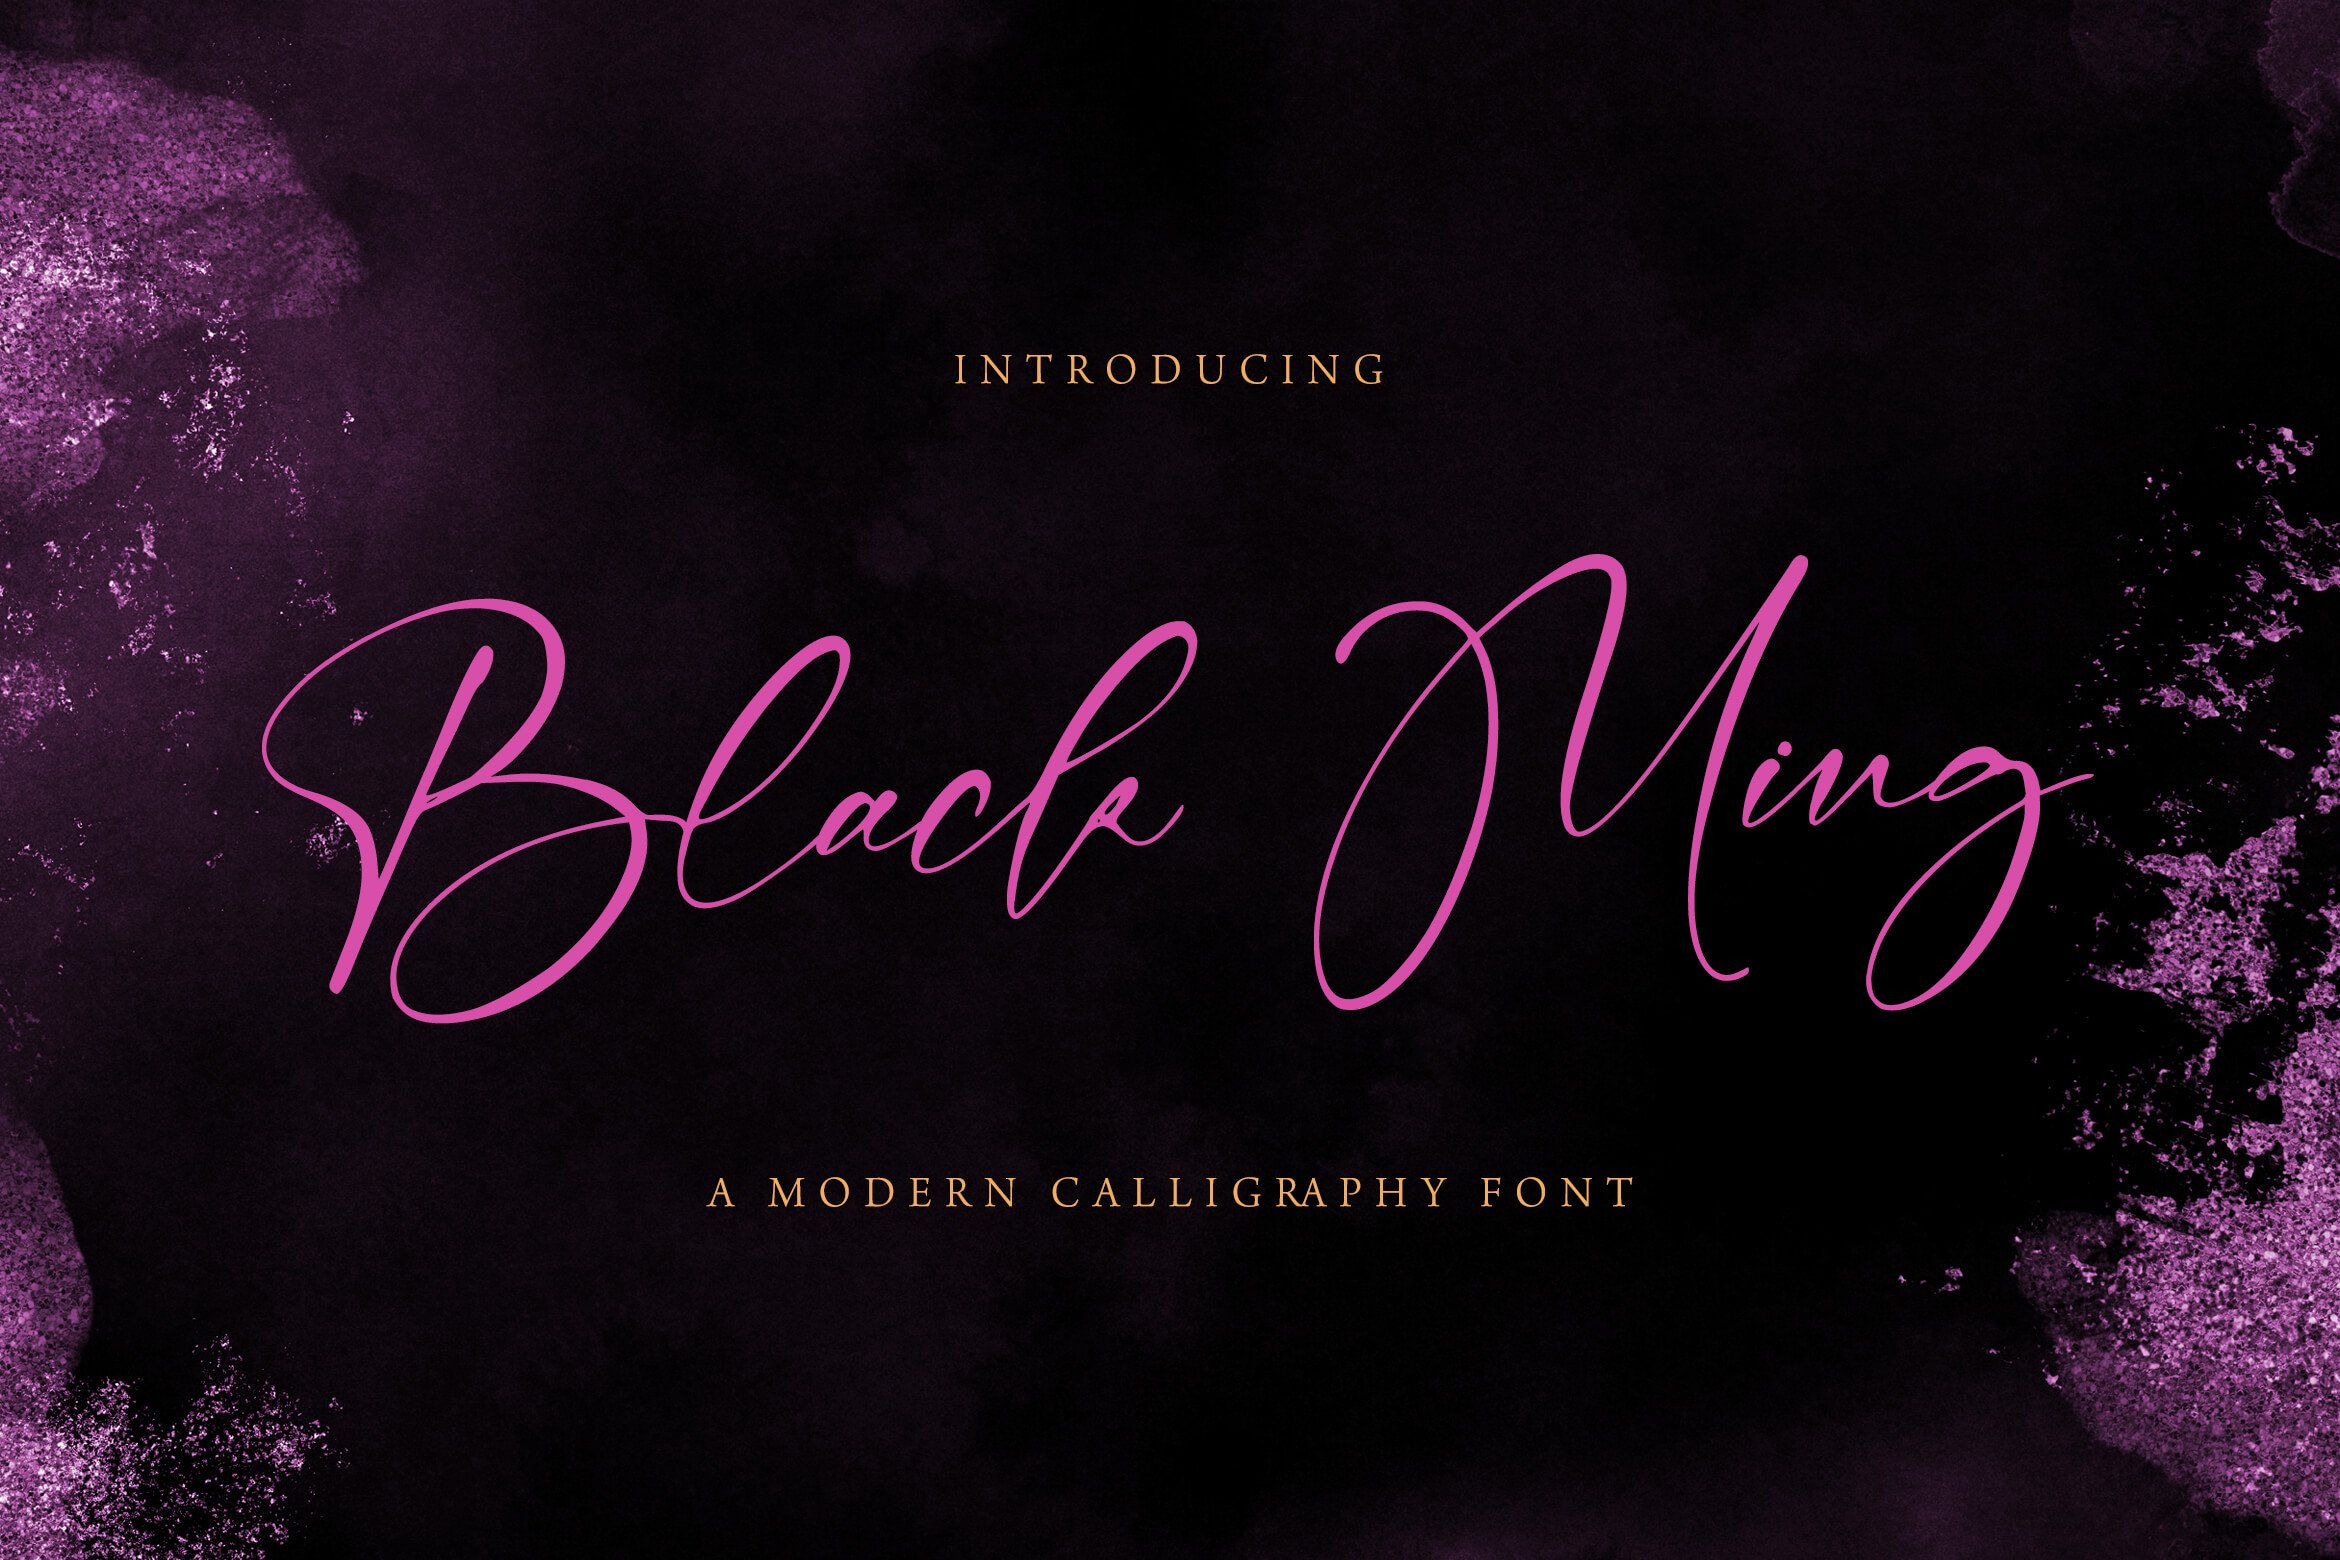 Black Ming - Calligraphy Font cover image.